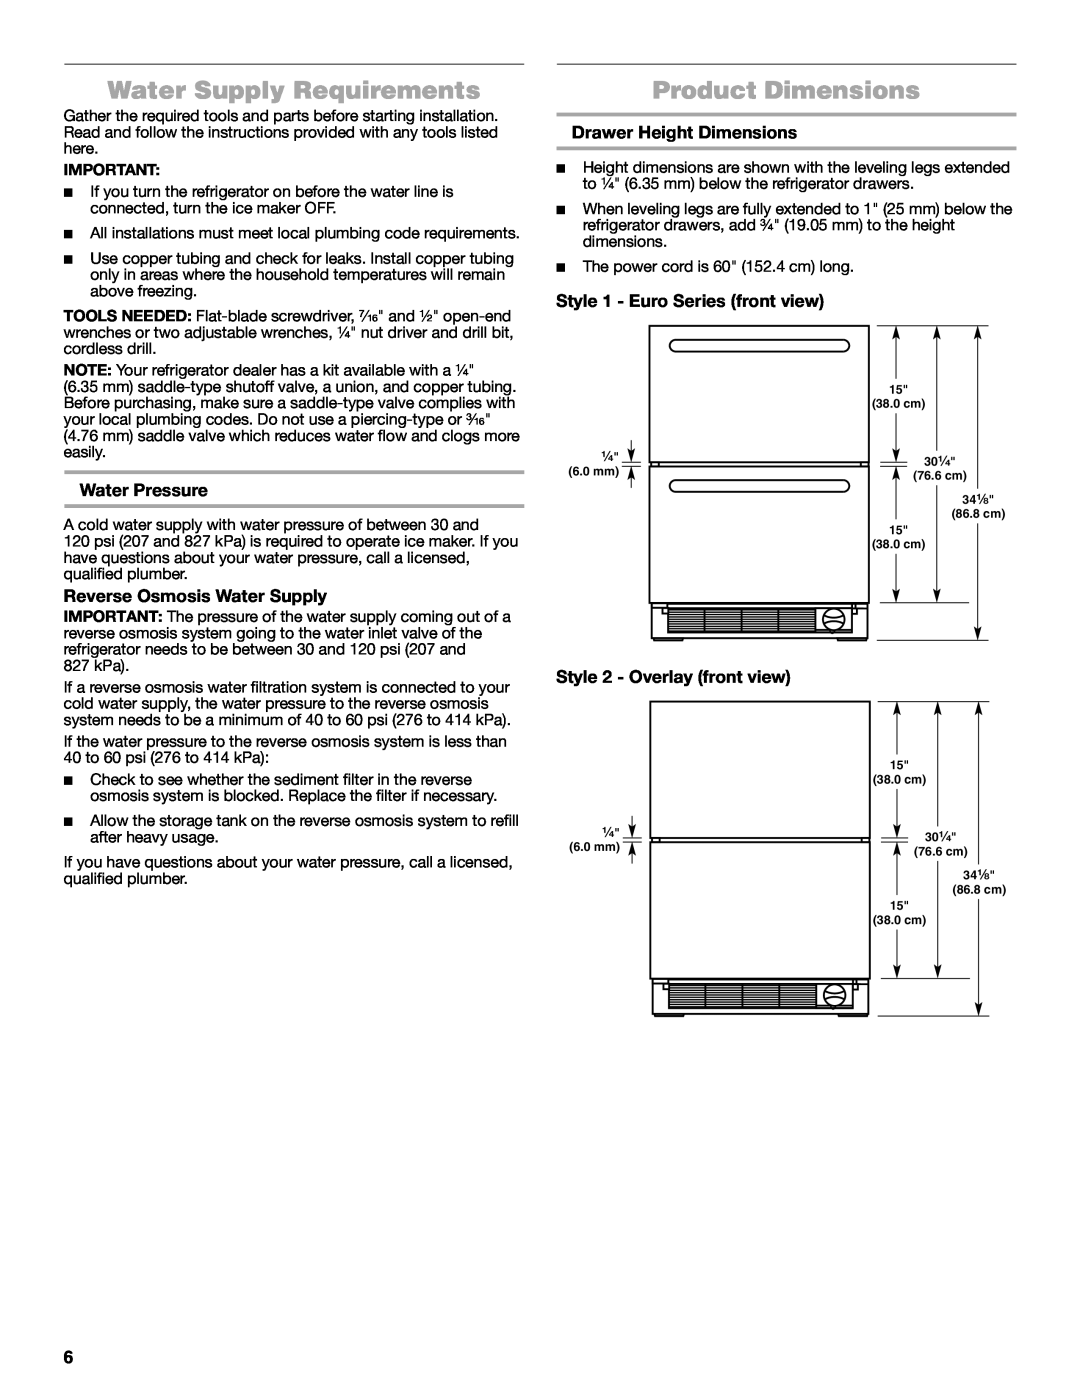 Jenn-Air W10549548A manual Water Supply Requirements, Product Dimensions, Water Pressure, Reverse Osmosis Water Supply 